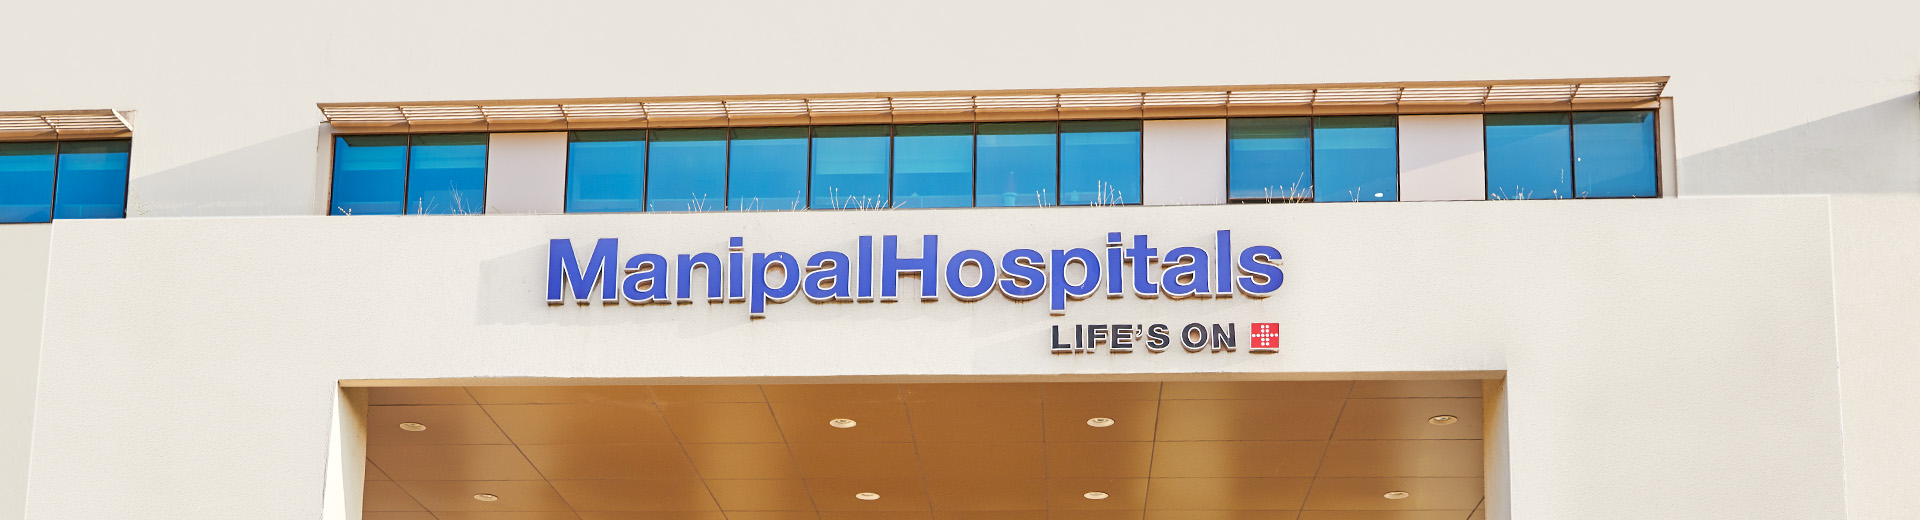 Privacy Policy | Manipal Hospitals Sarjapur Road, Bangalore